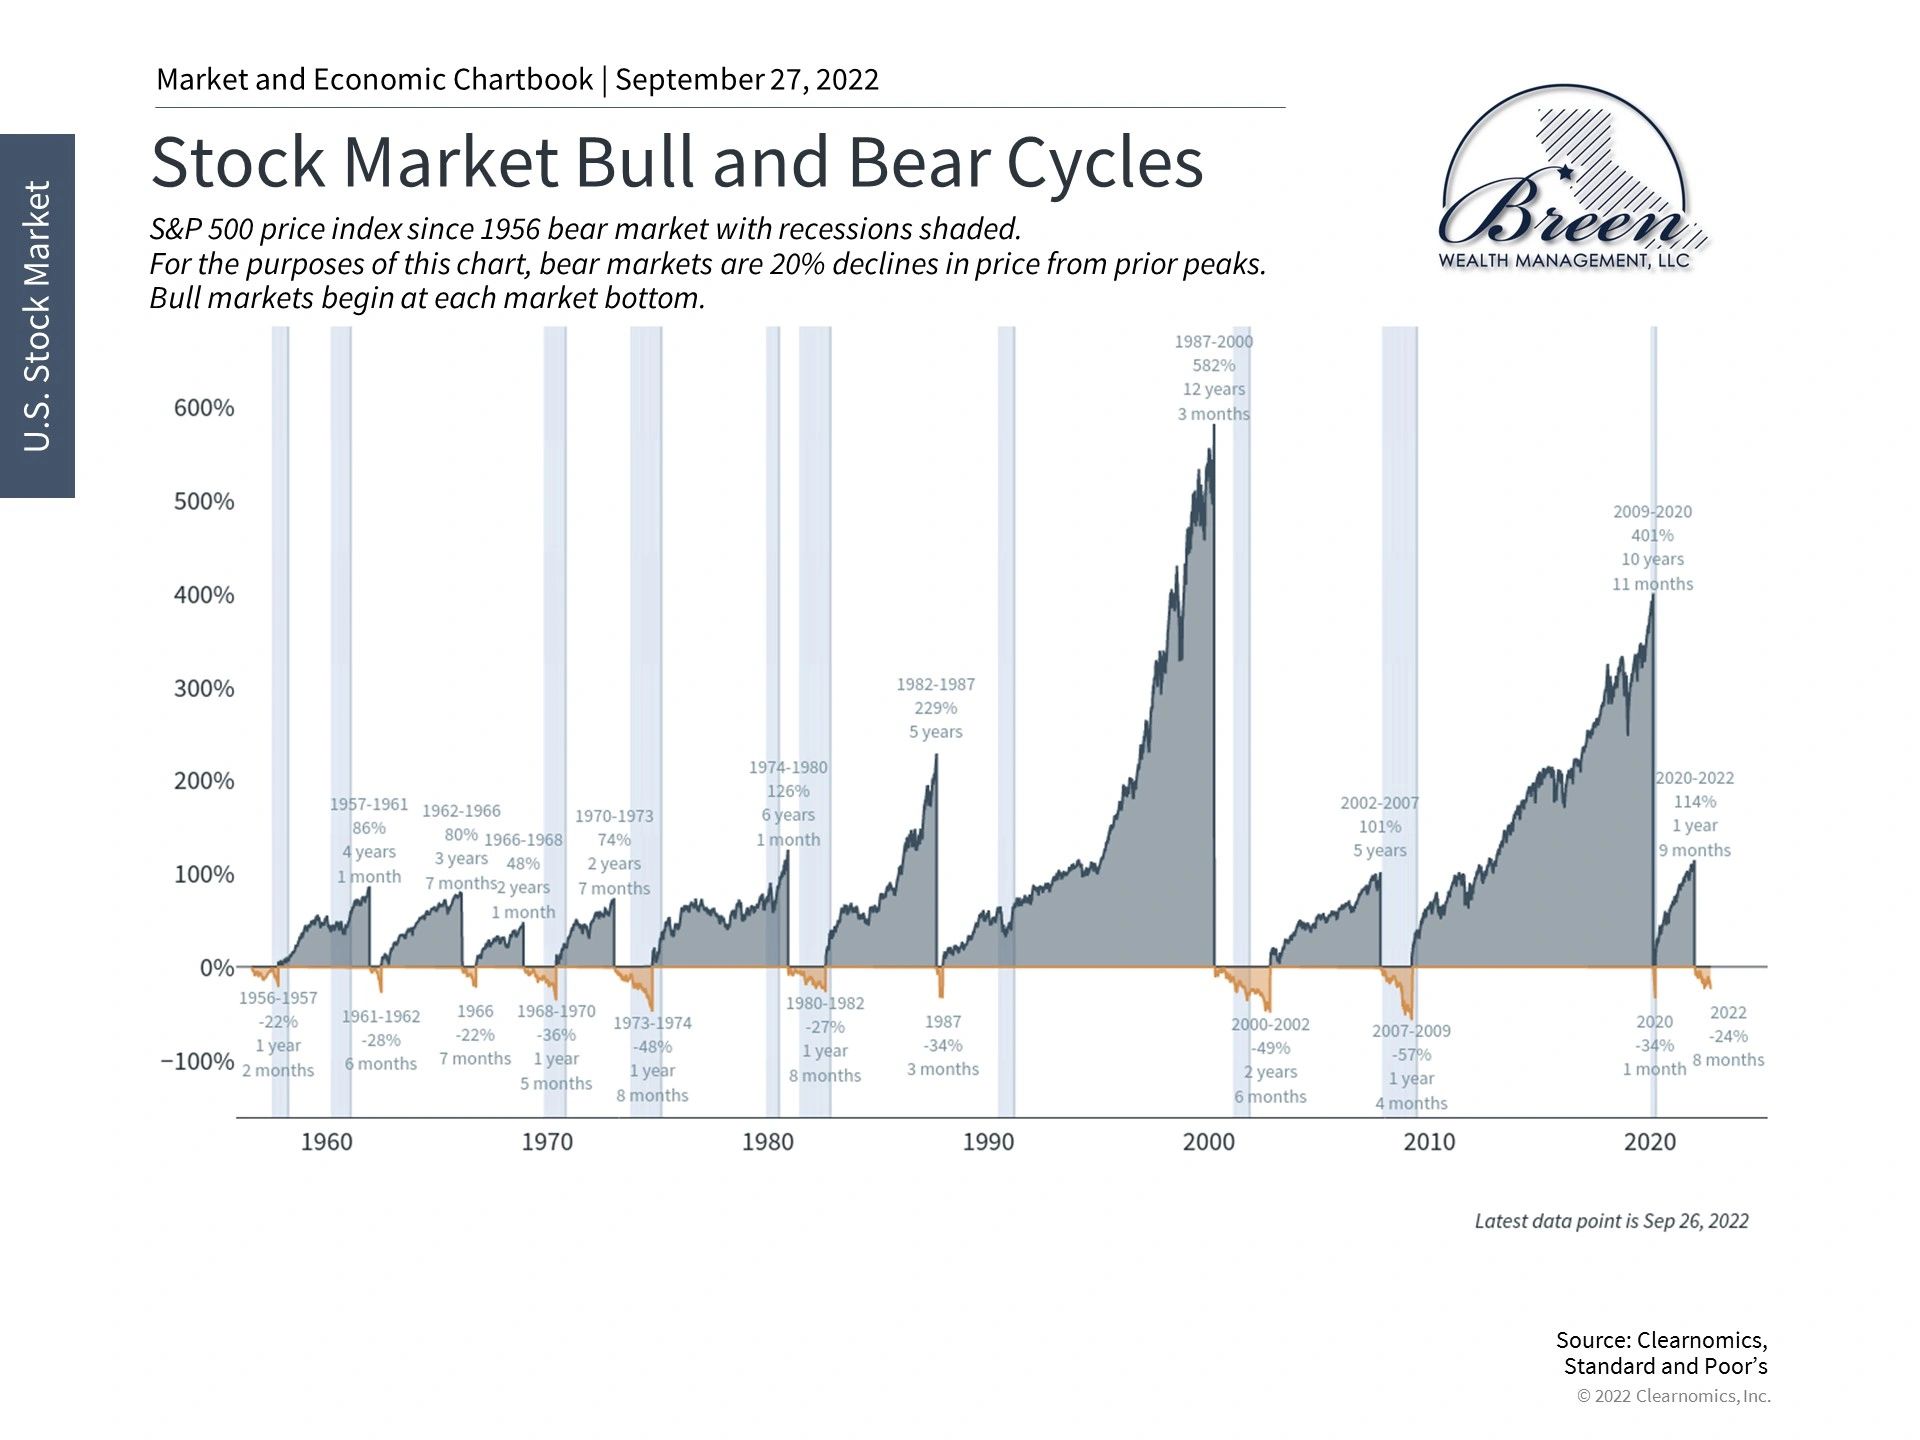 Keeping Bear Markets in Perspective to Stay Invested